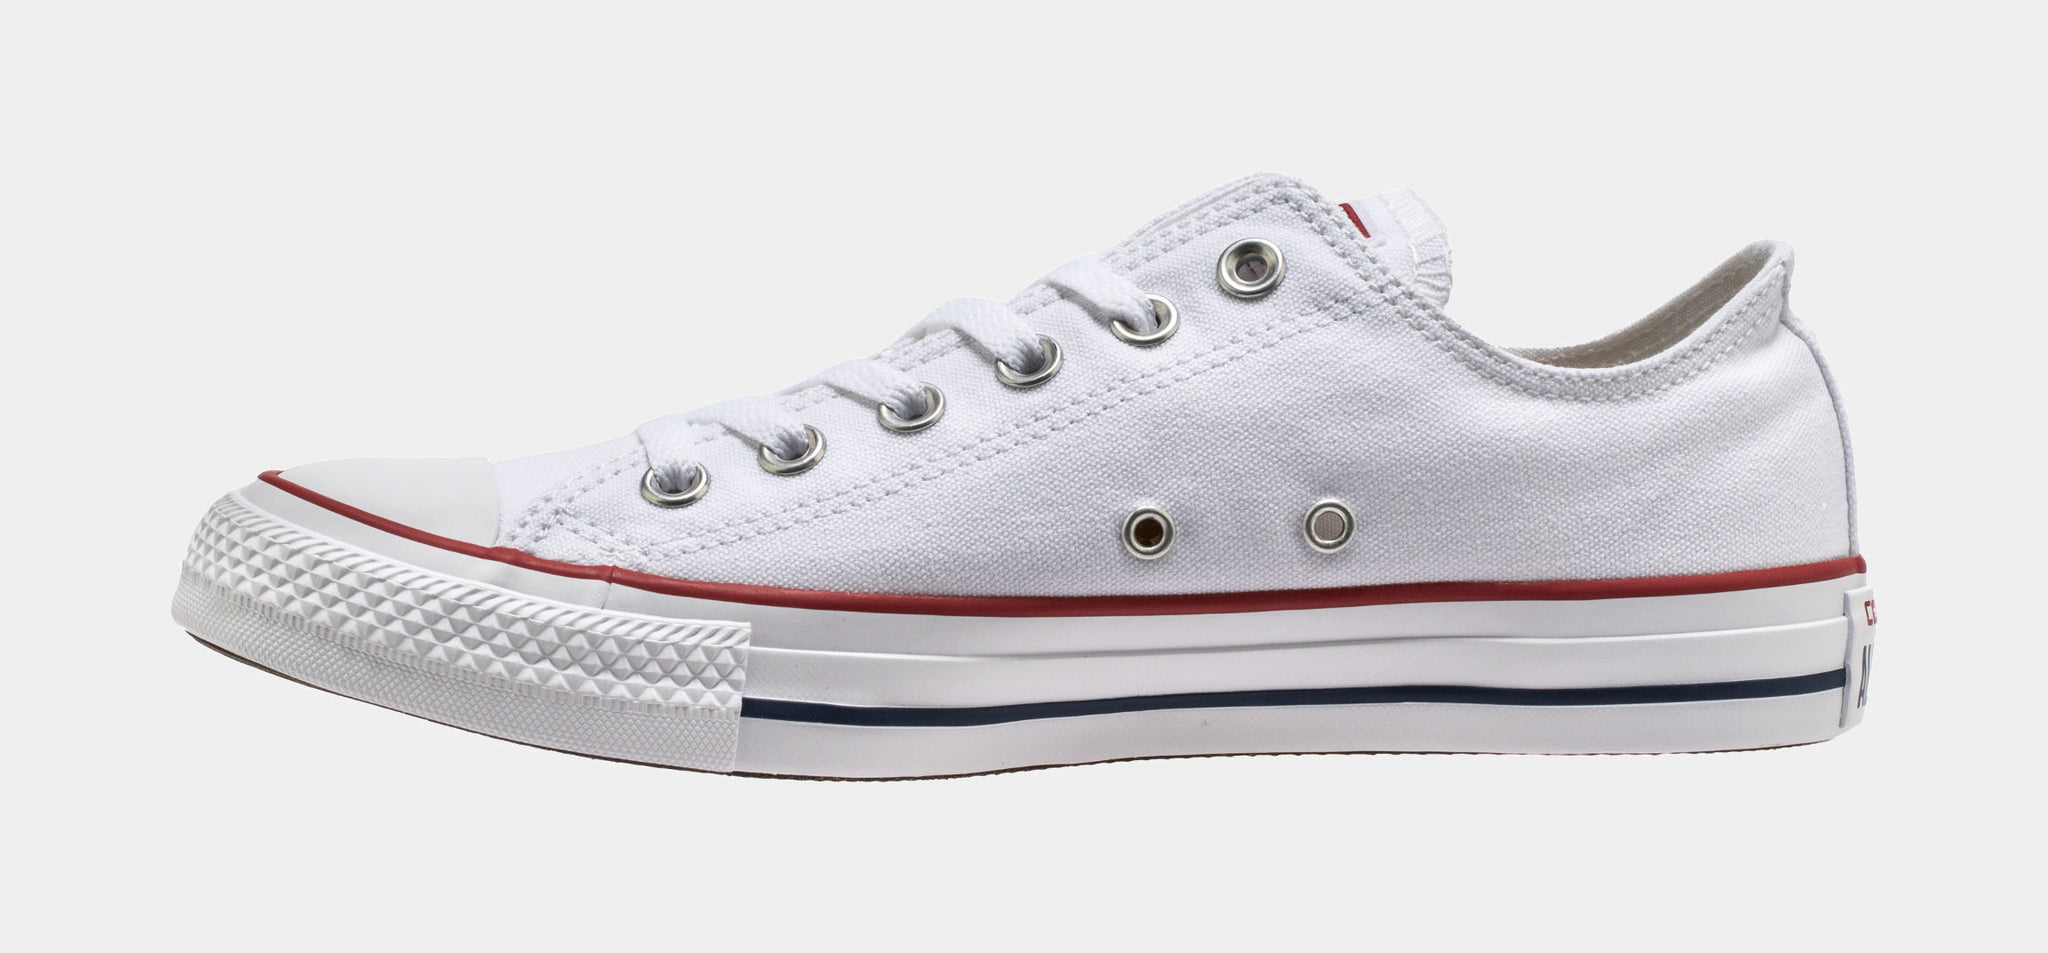 Converse Chuck Taylor All Star Classic Low Solid Canvas Lifestyle Shoe Optical White – Shoe Palace